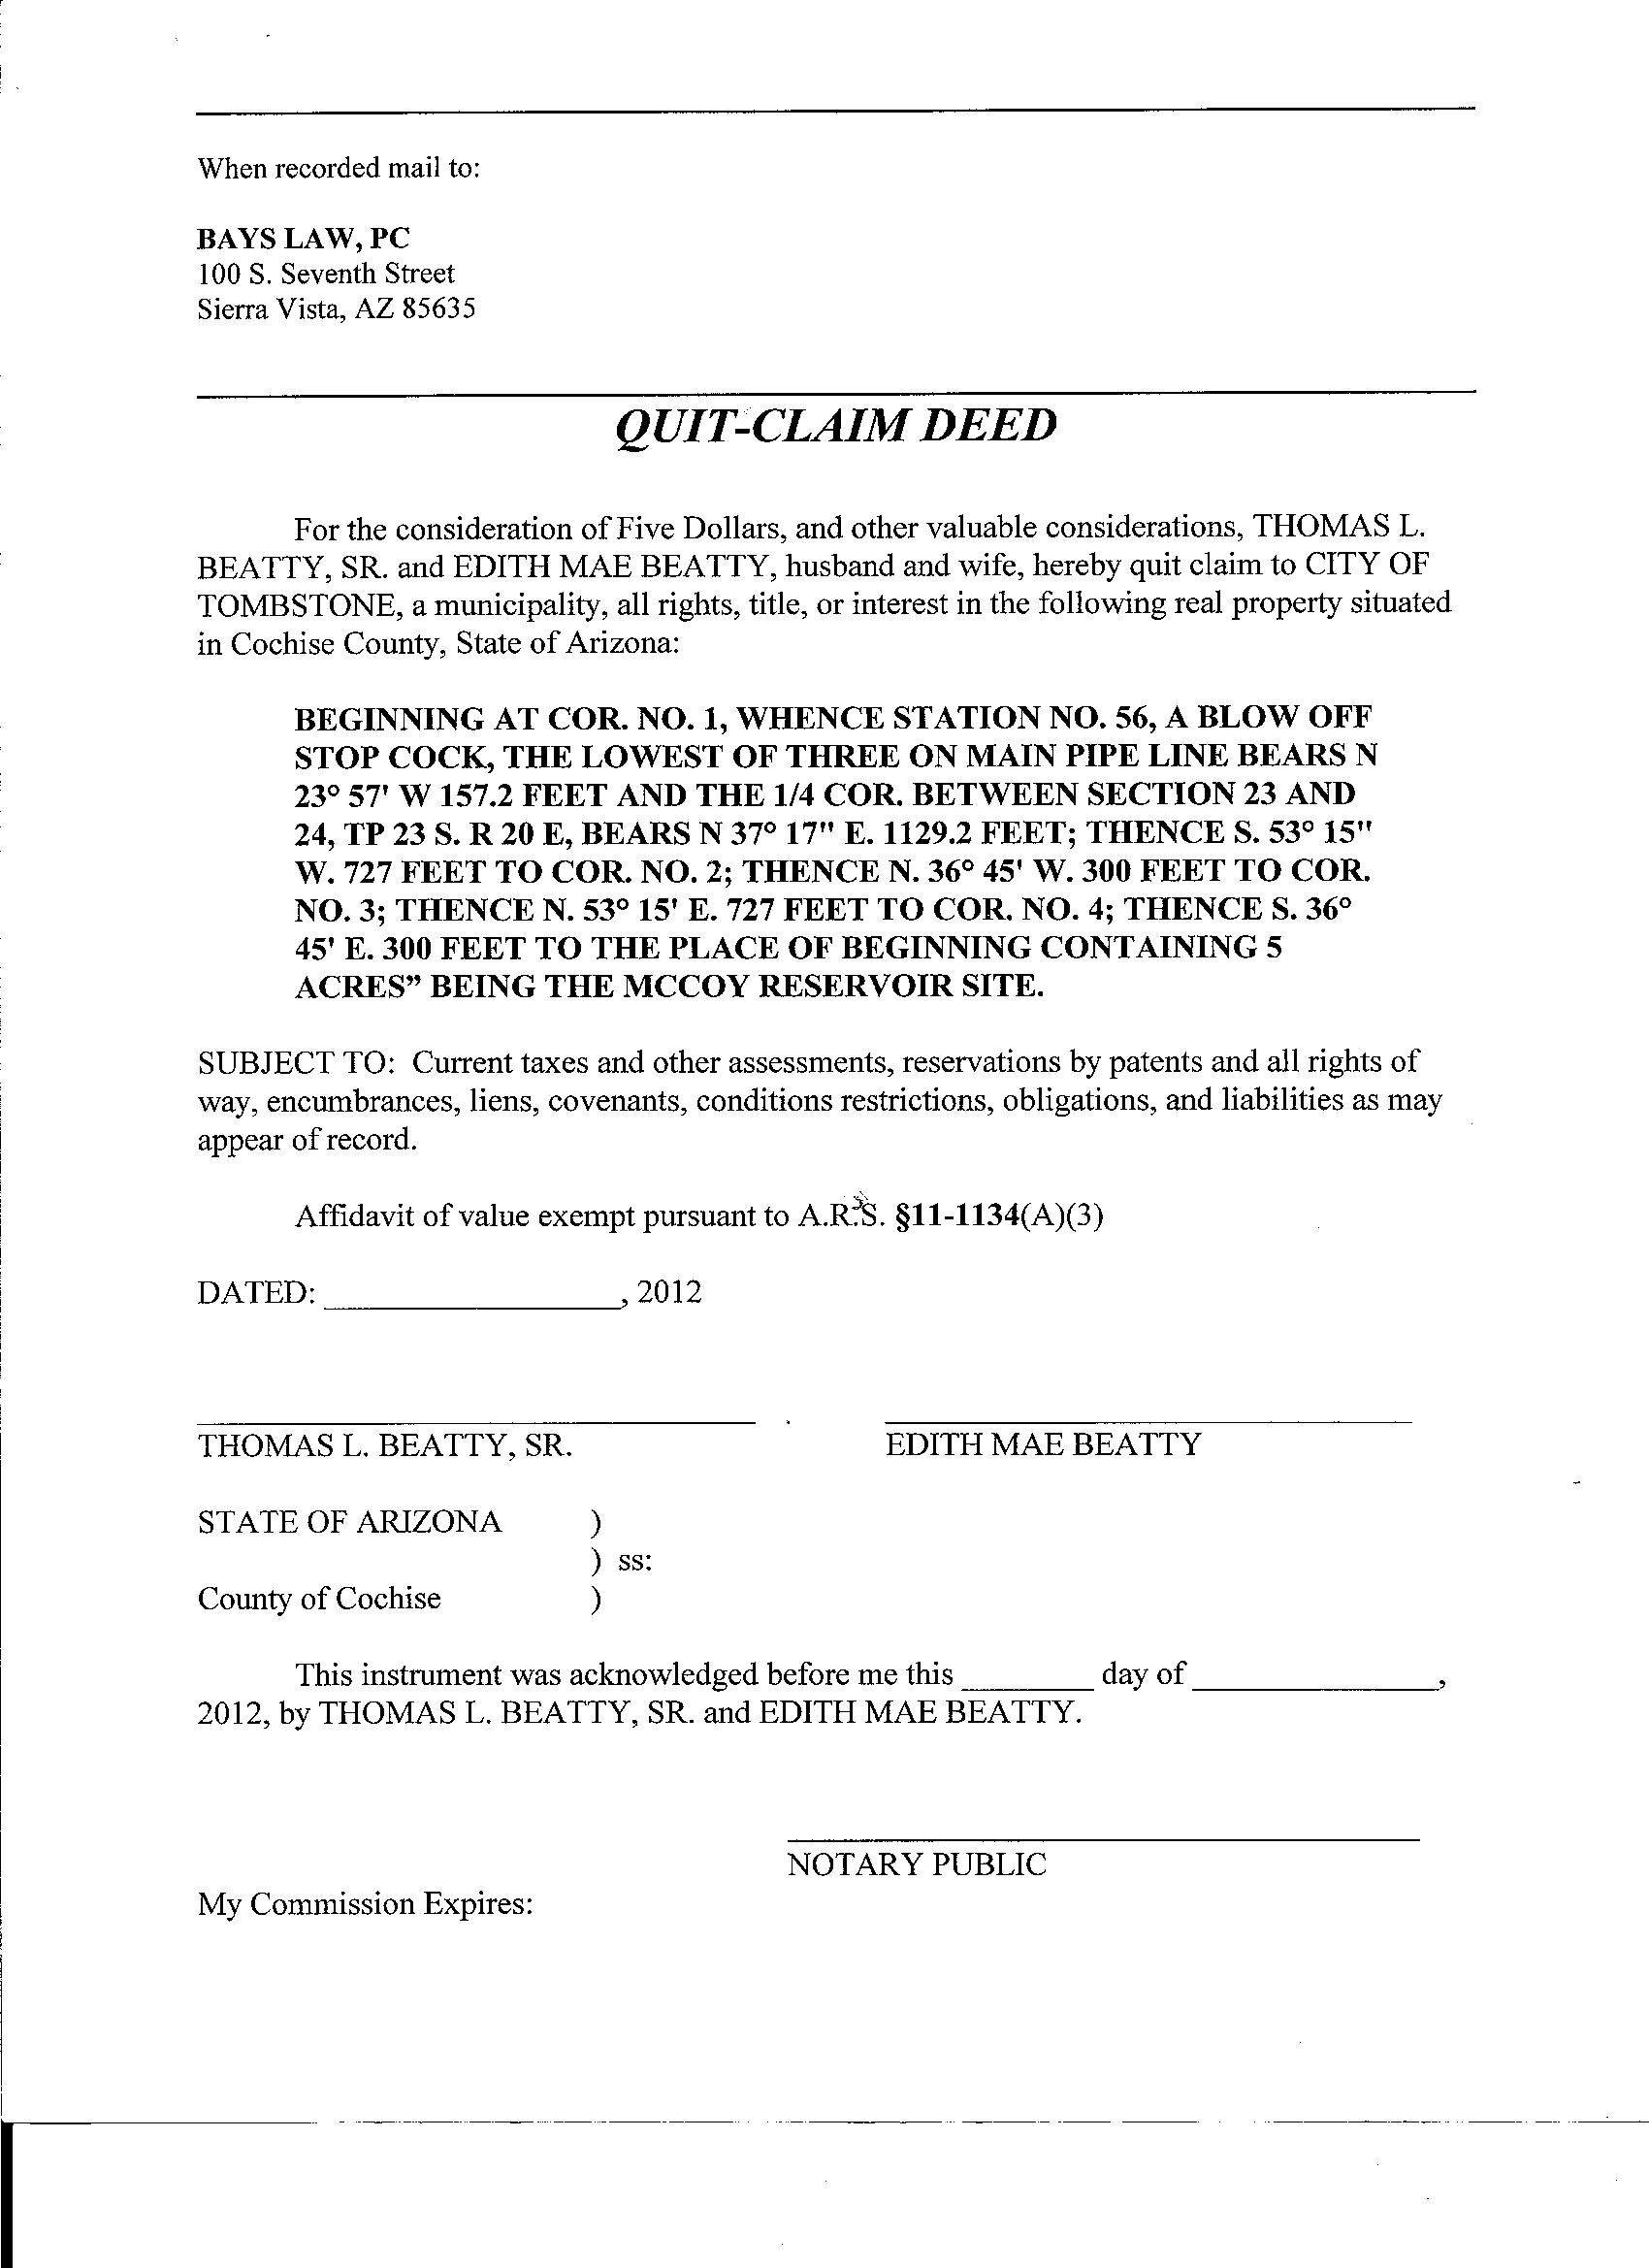 Example Of A Quit Claim Deed Completed Fill Out And S - vrogue.co